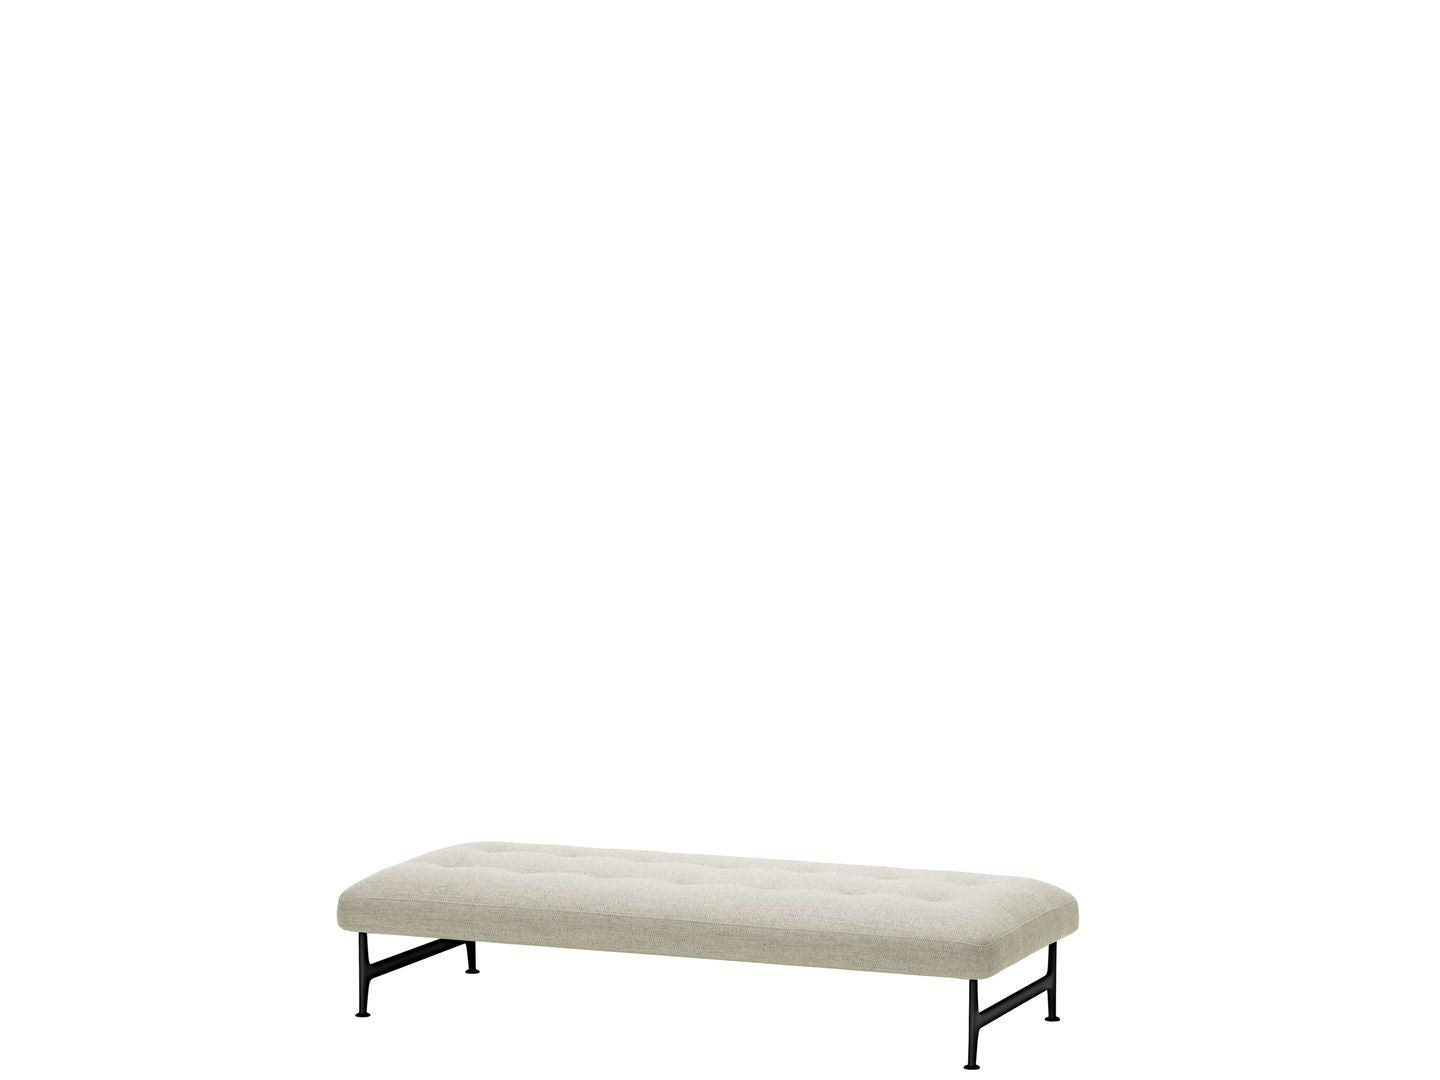 Vitra Grand Sofa Bench from One52 Furniture - perfect for any living room